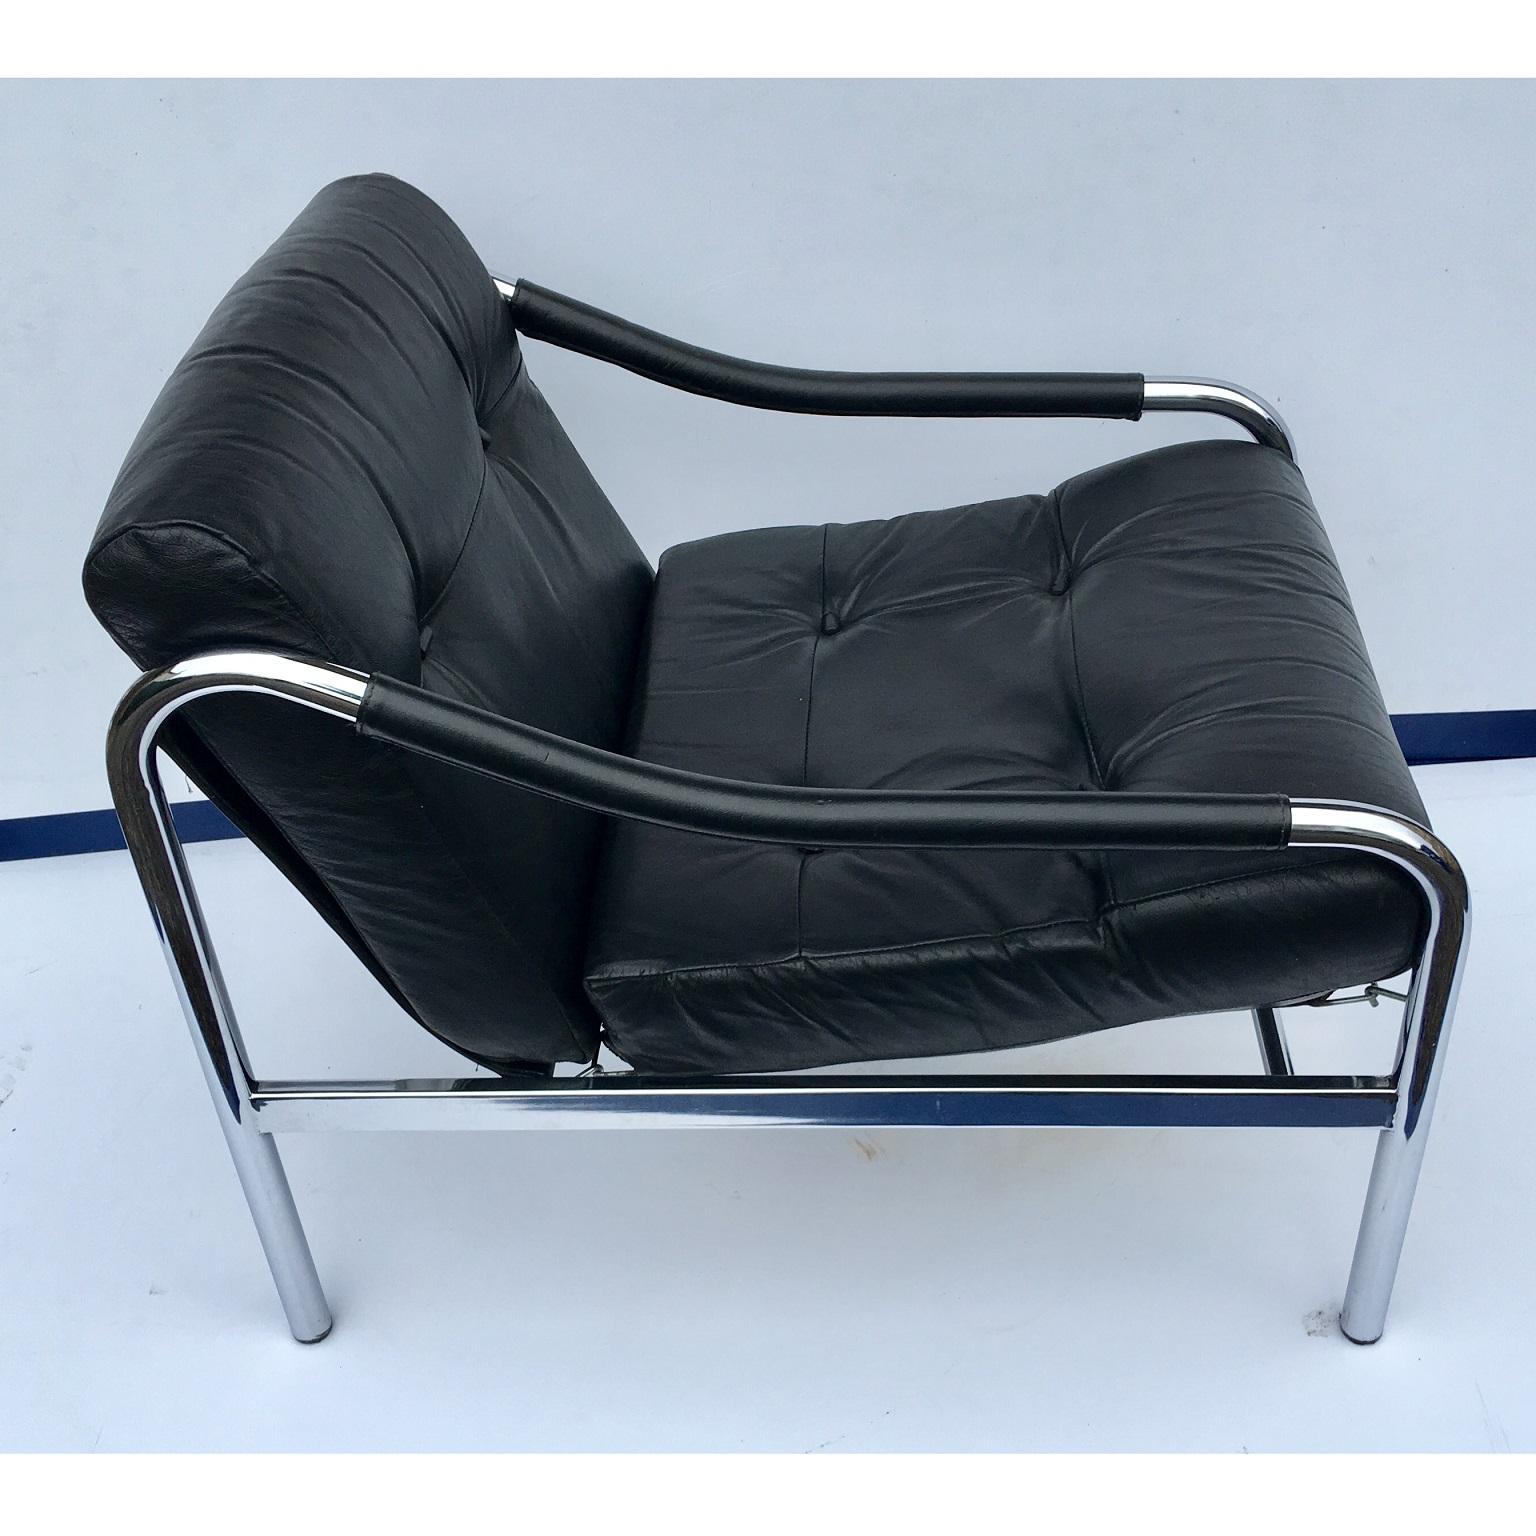 Black leather Pieff chair designed by Tim Bates, circa 1970s.

Beautiful Black leather lounge chair manufactured by Pieff UK, designed by Tim Bates during the 1970s, from the ‘Beta’ range

With chrome plated frame, Pirelli rubber seat pad and